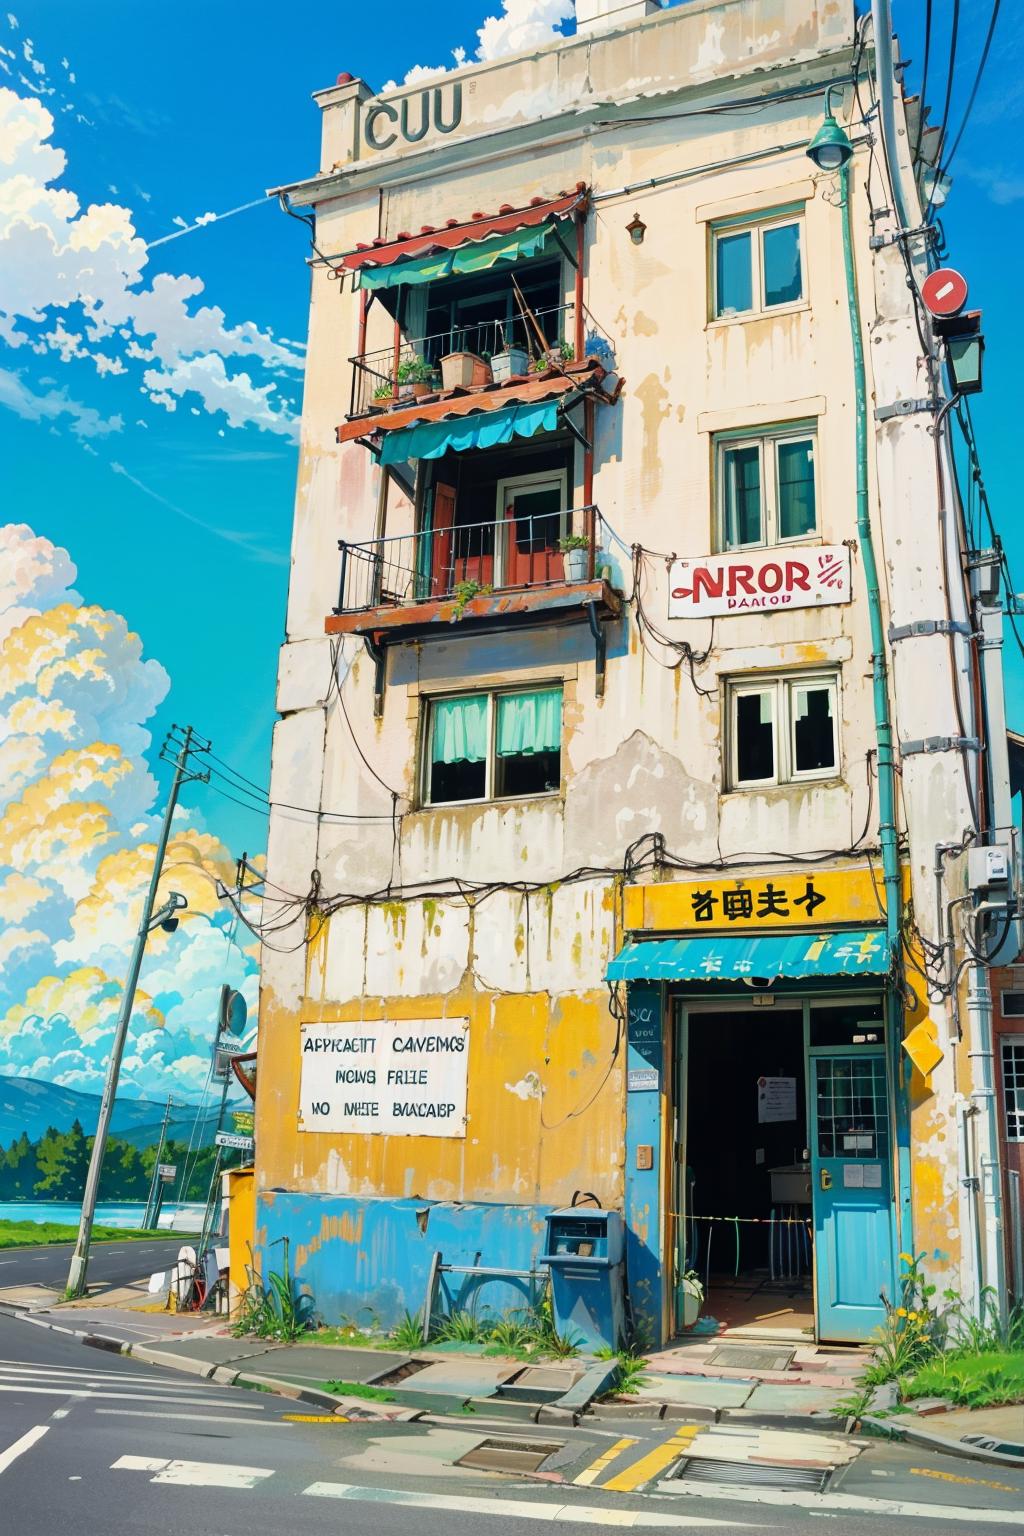 Painted Cartoon of a Dilapidated Building with Yellow and Blue Accents and Signs.